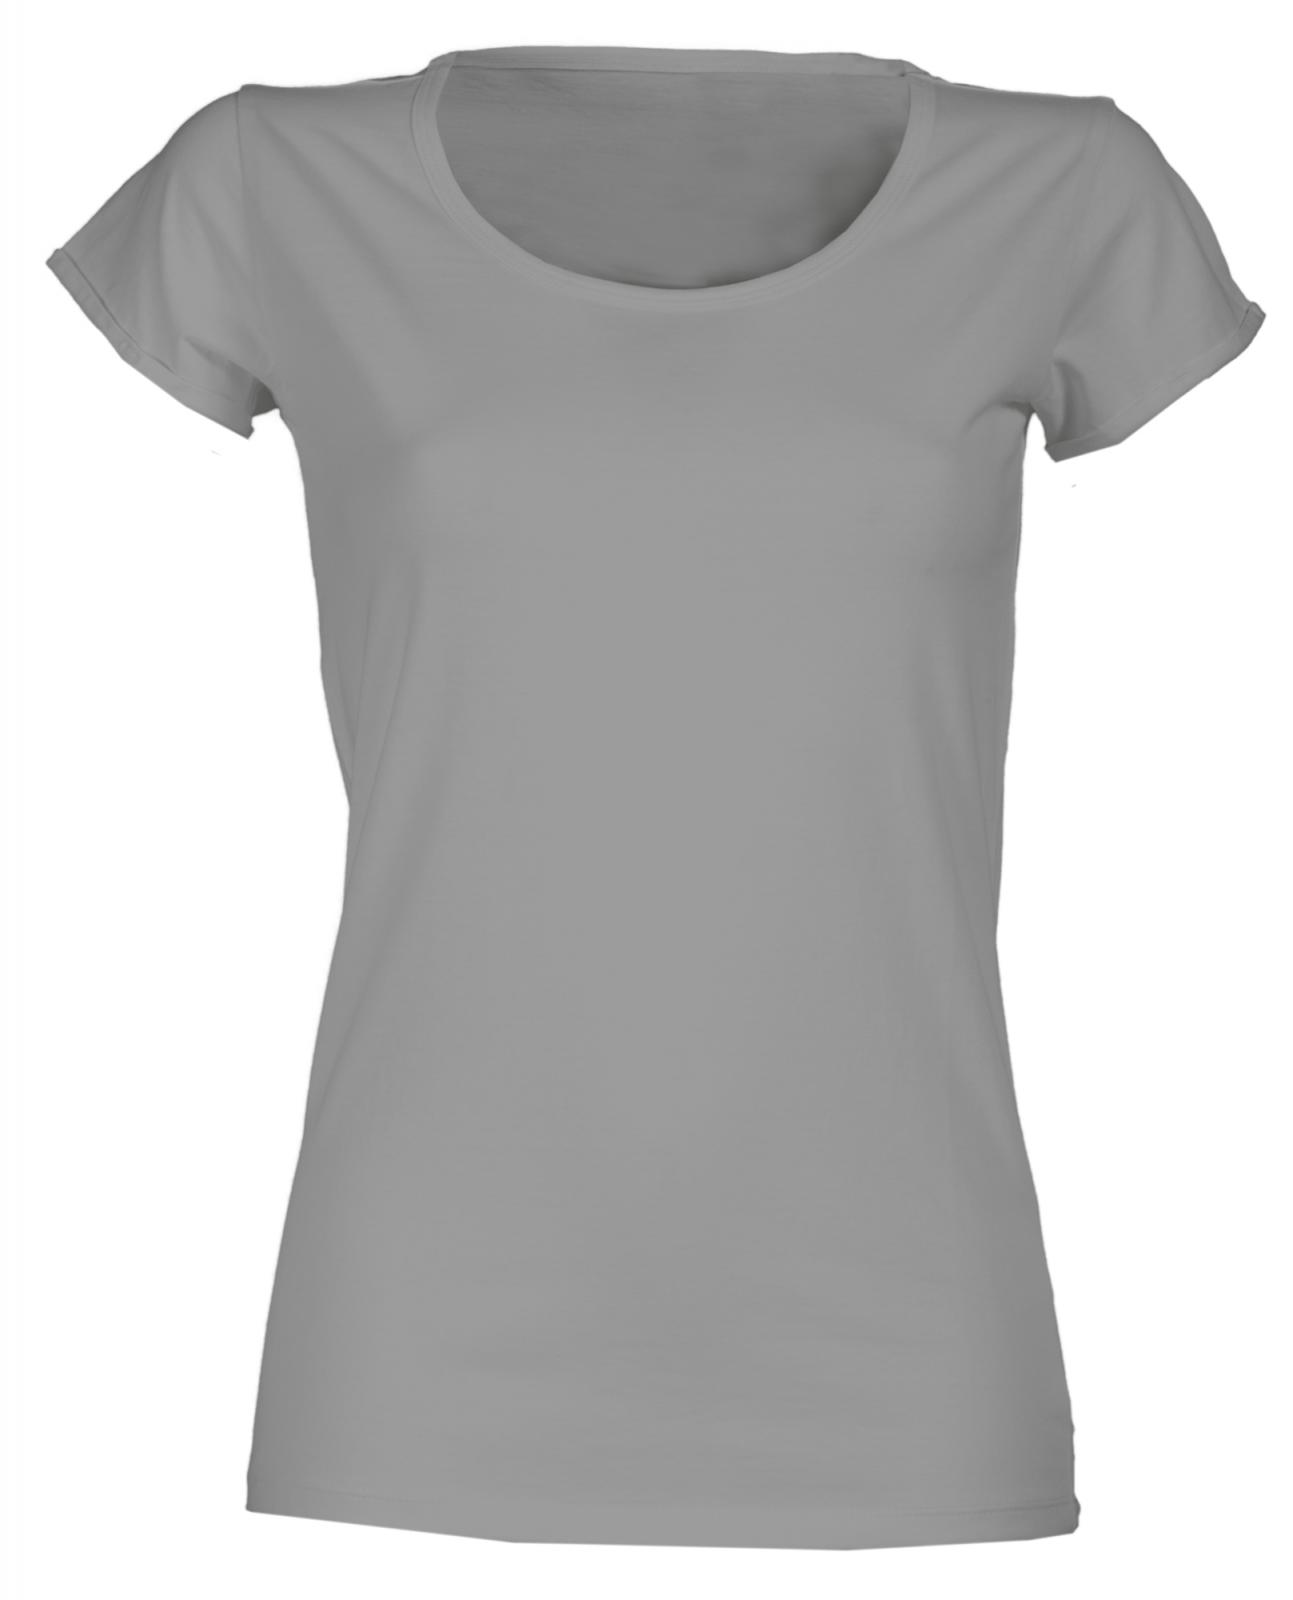 T shirt donna Young Lady